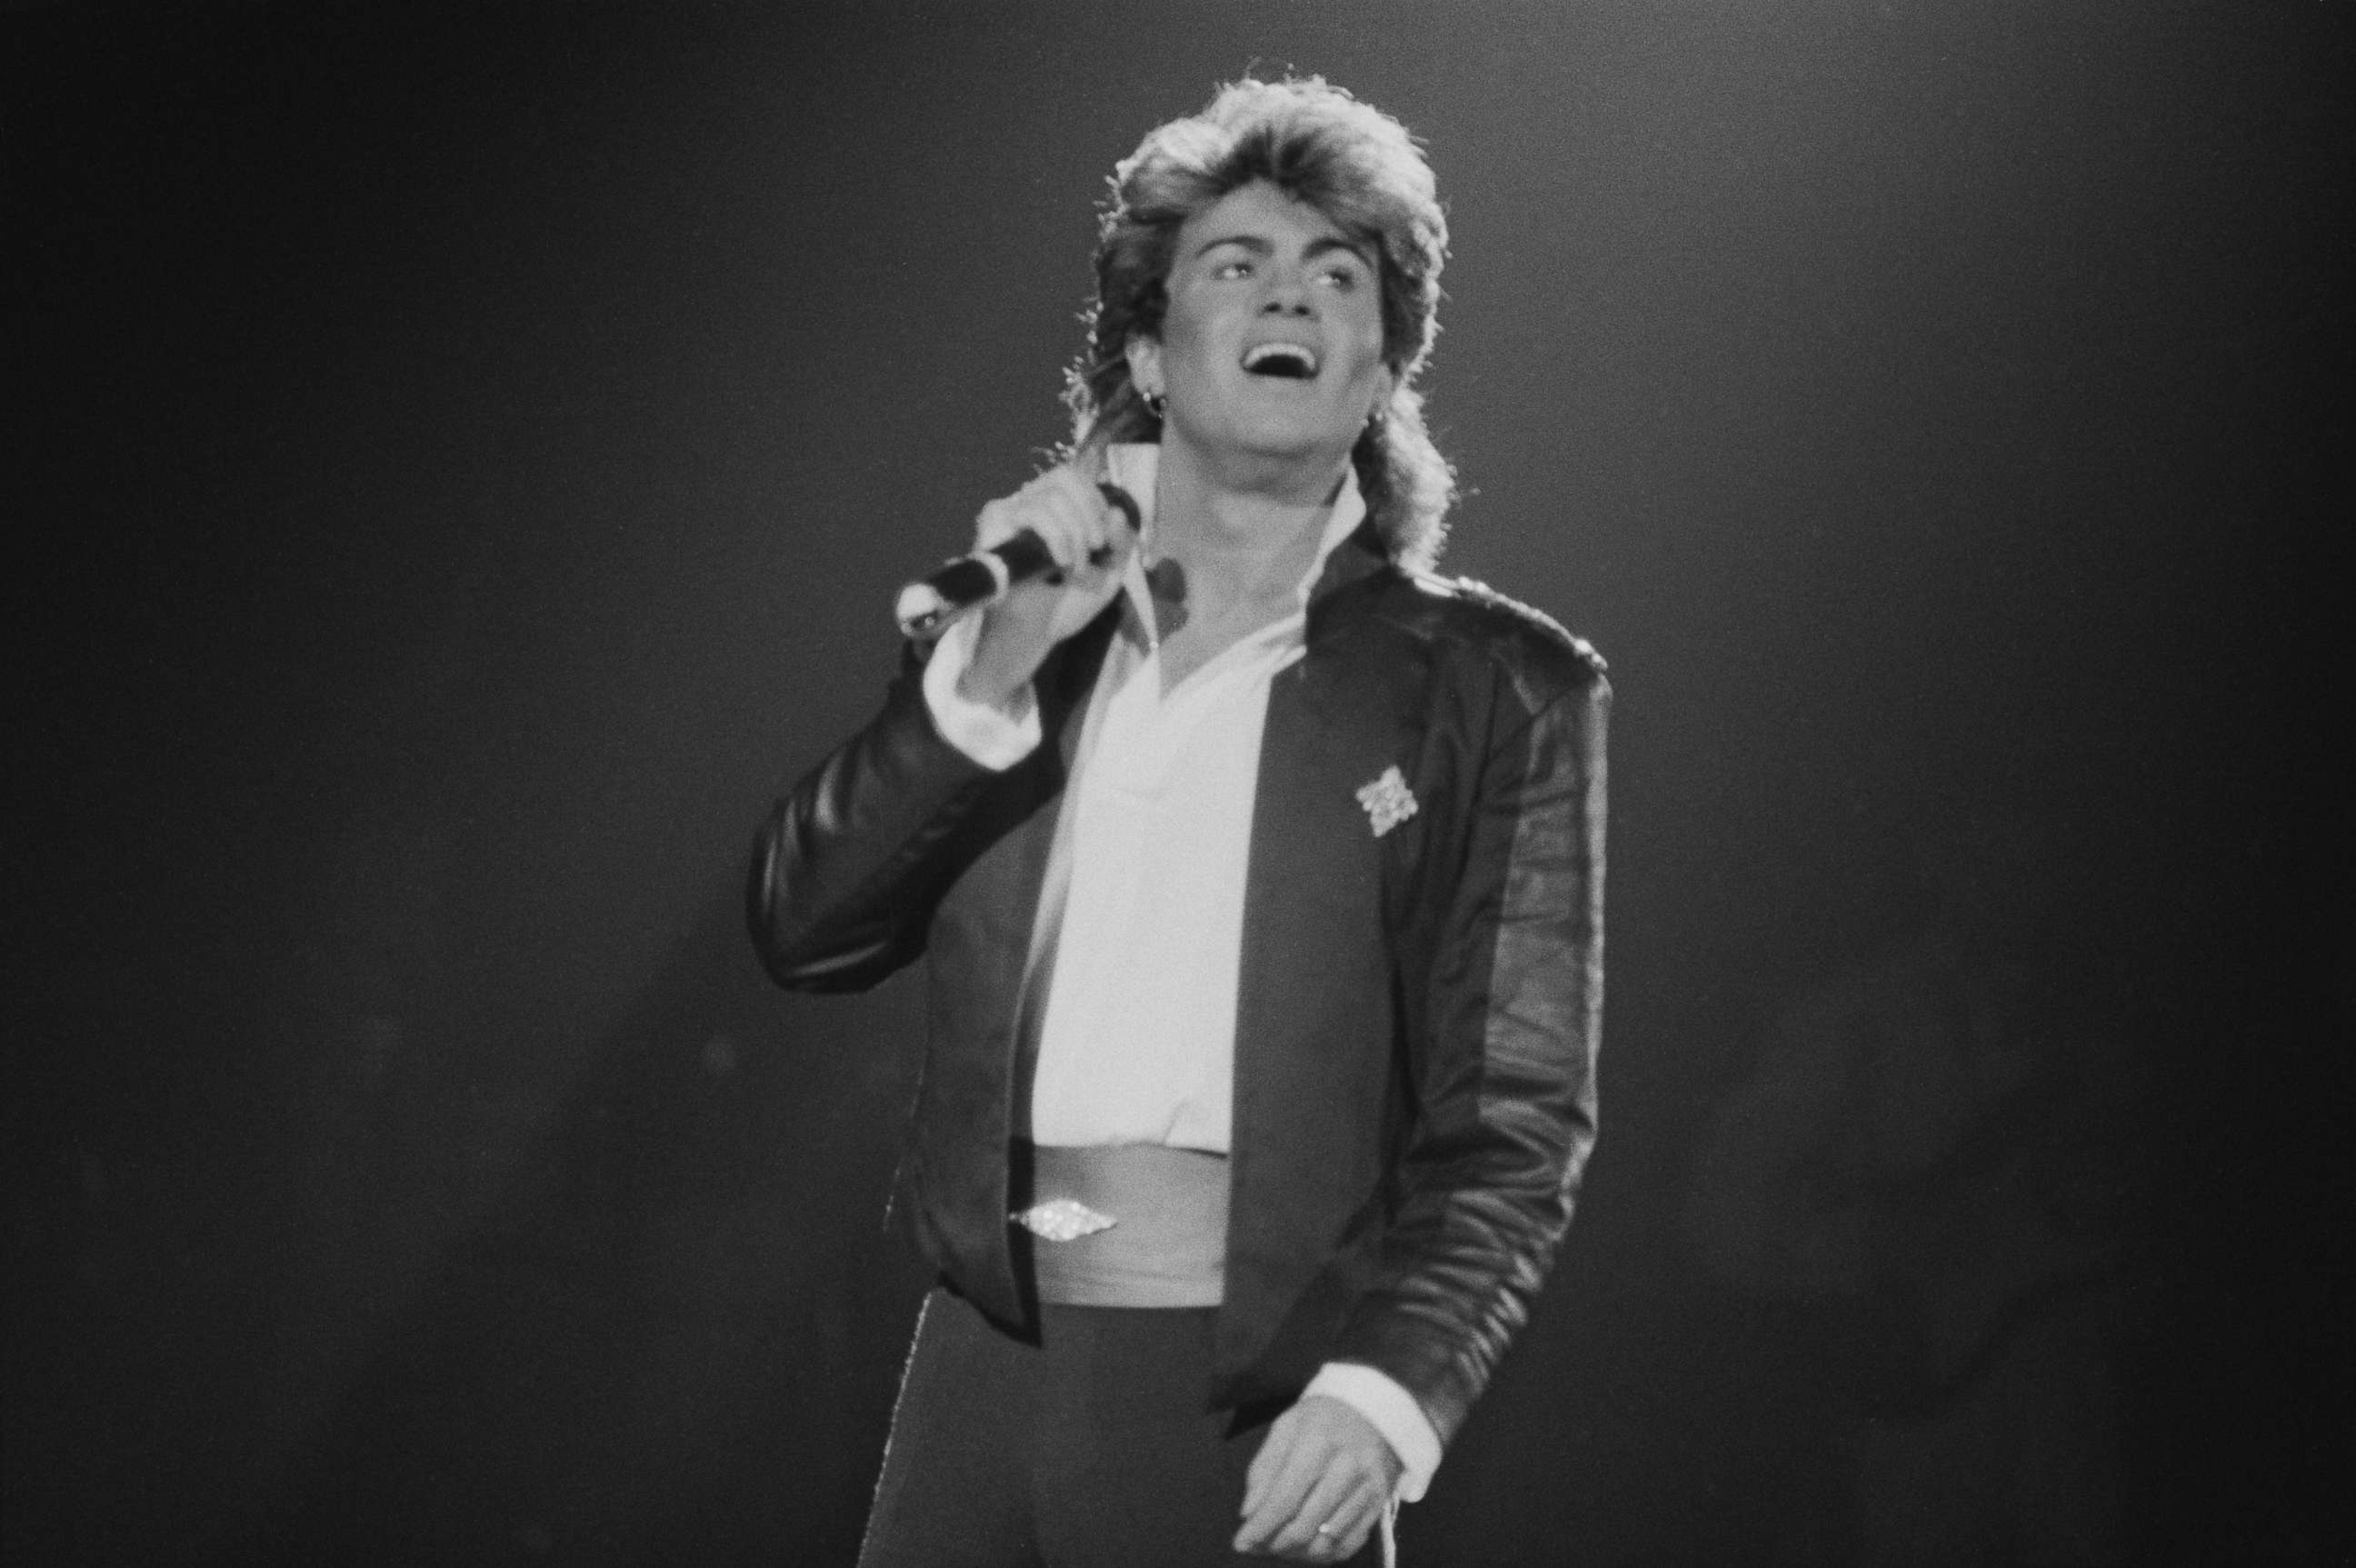 PHOTO: Singer-songwriter George Michael of Wham!, performing on stage during the pop duo's 1985 world tour, Jan. 1985.